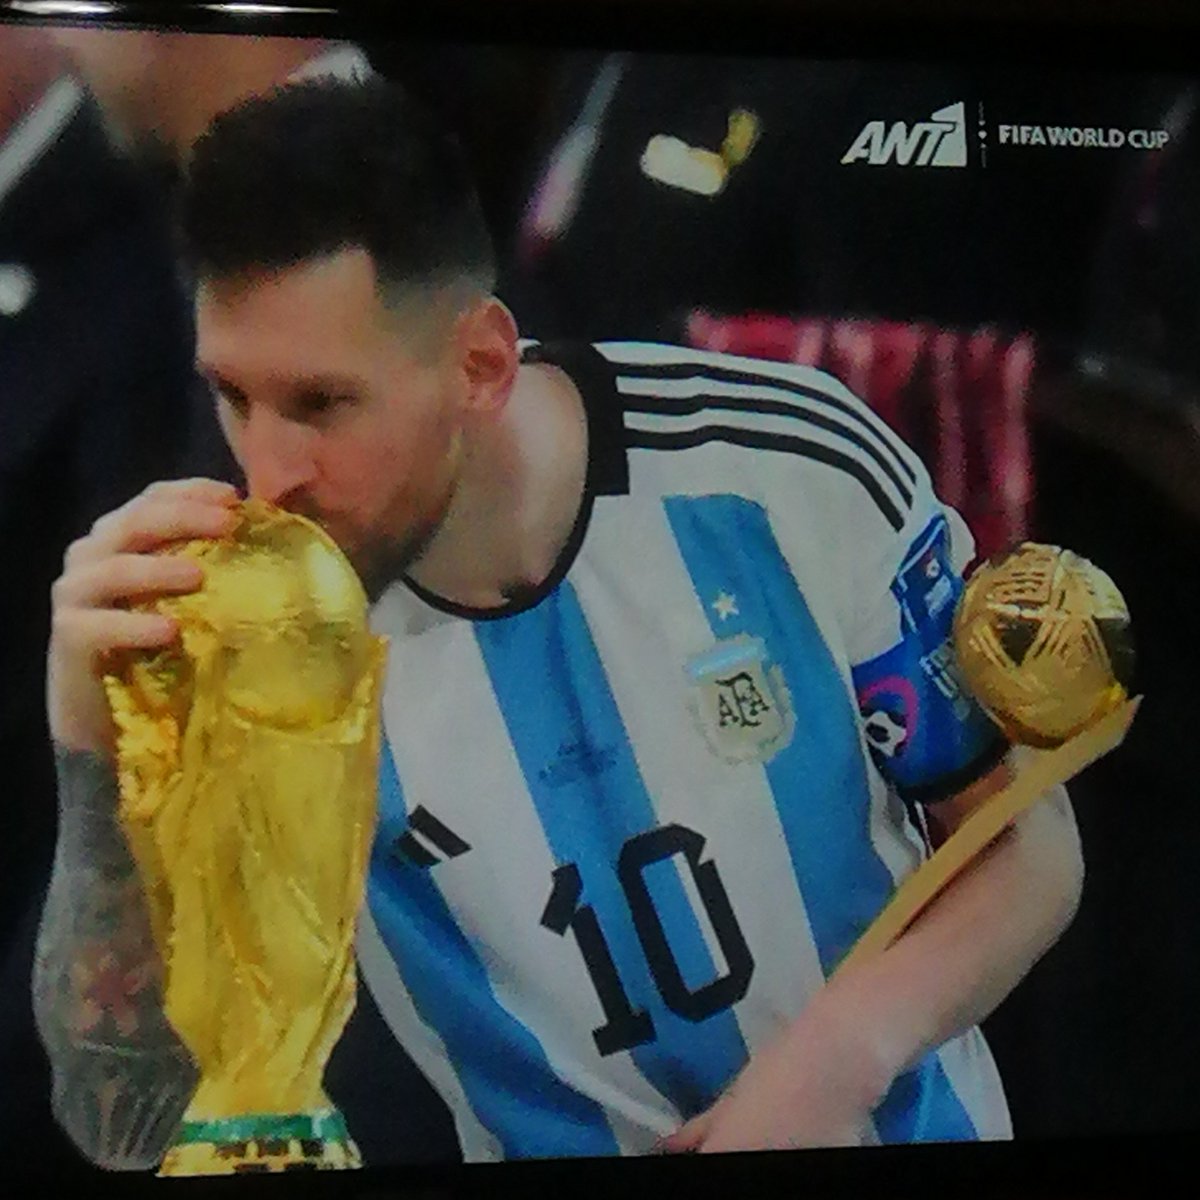 😍😍😍👏👏👏 #FIFAWorldCupgr #ARGFRA #messi